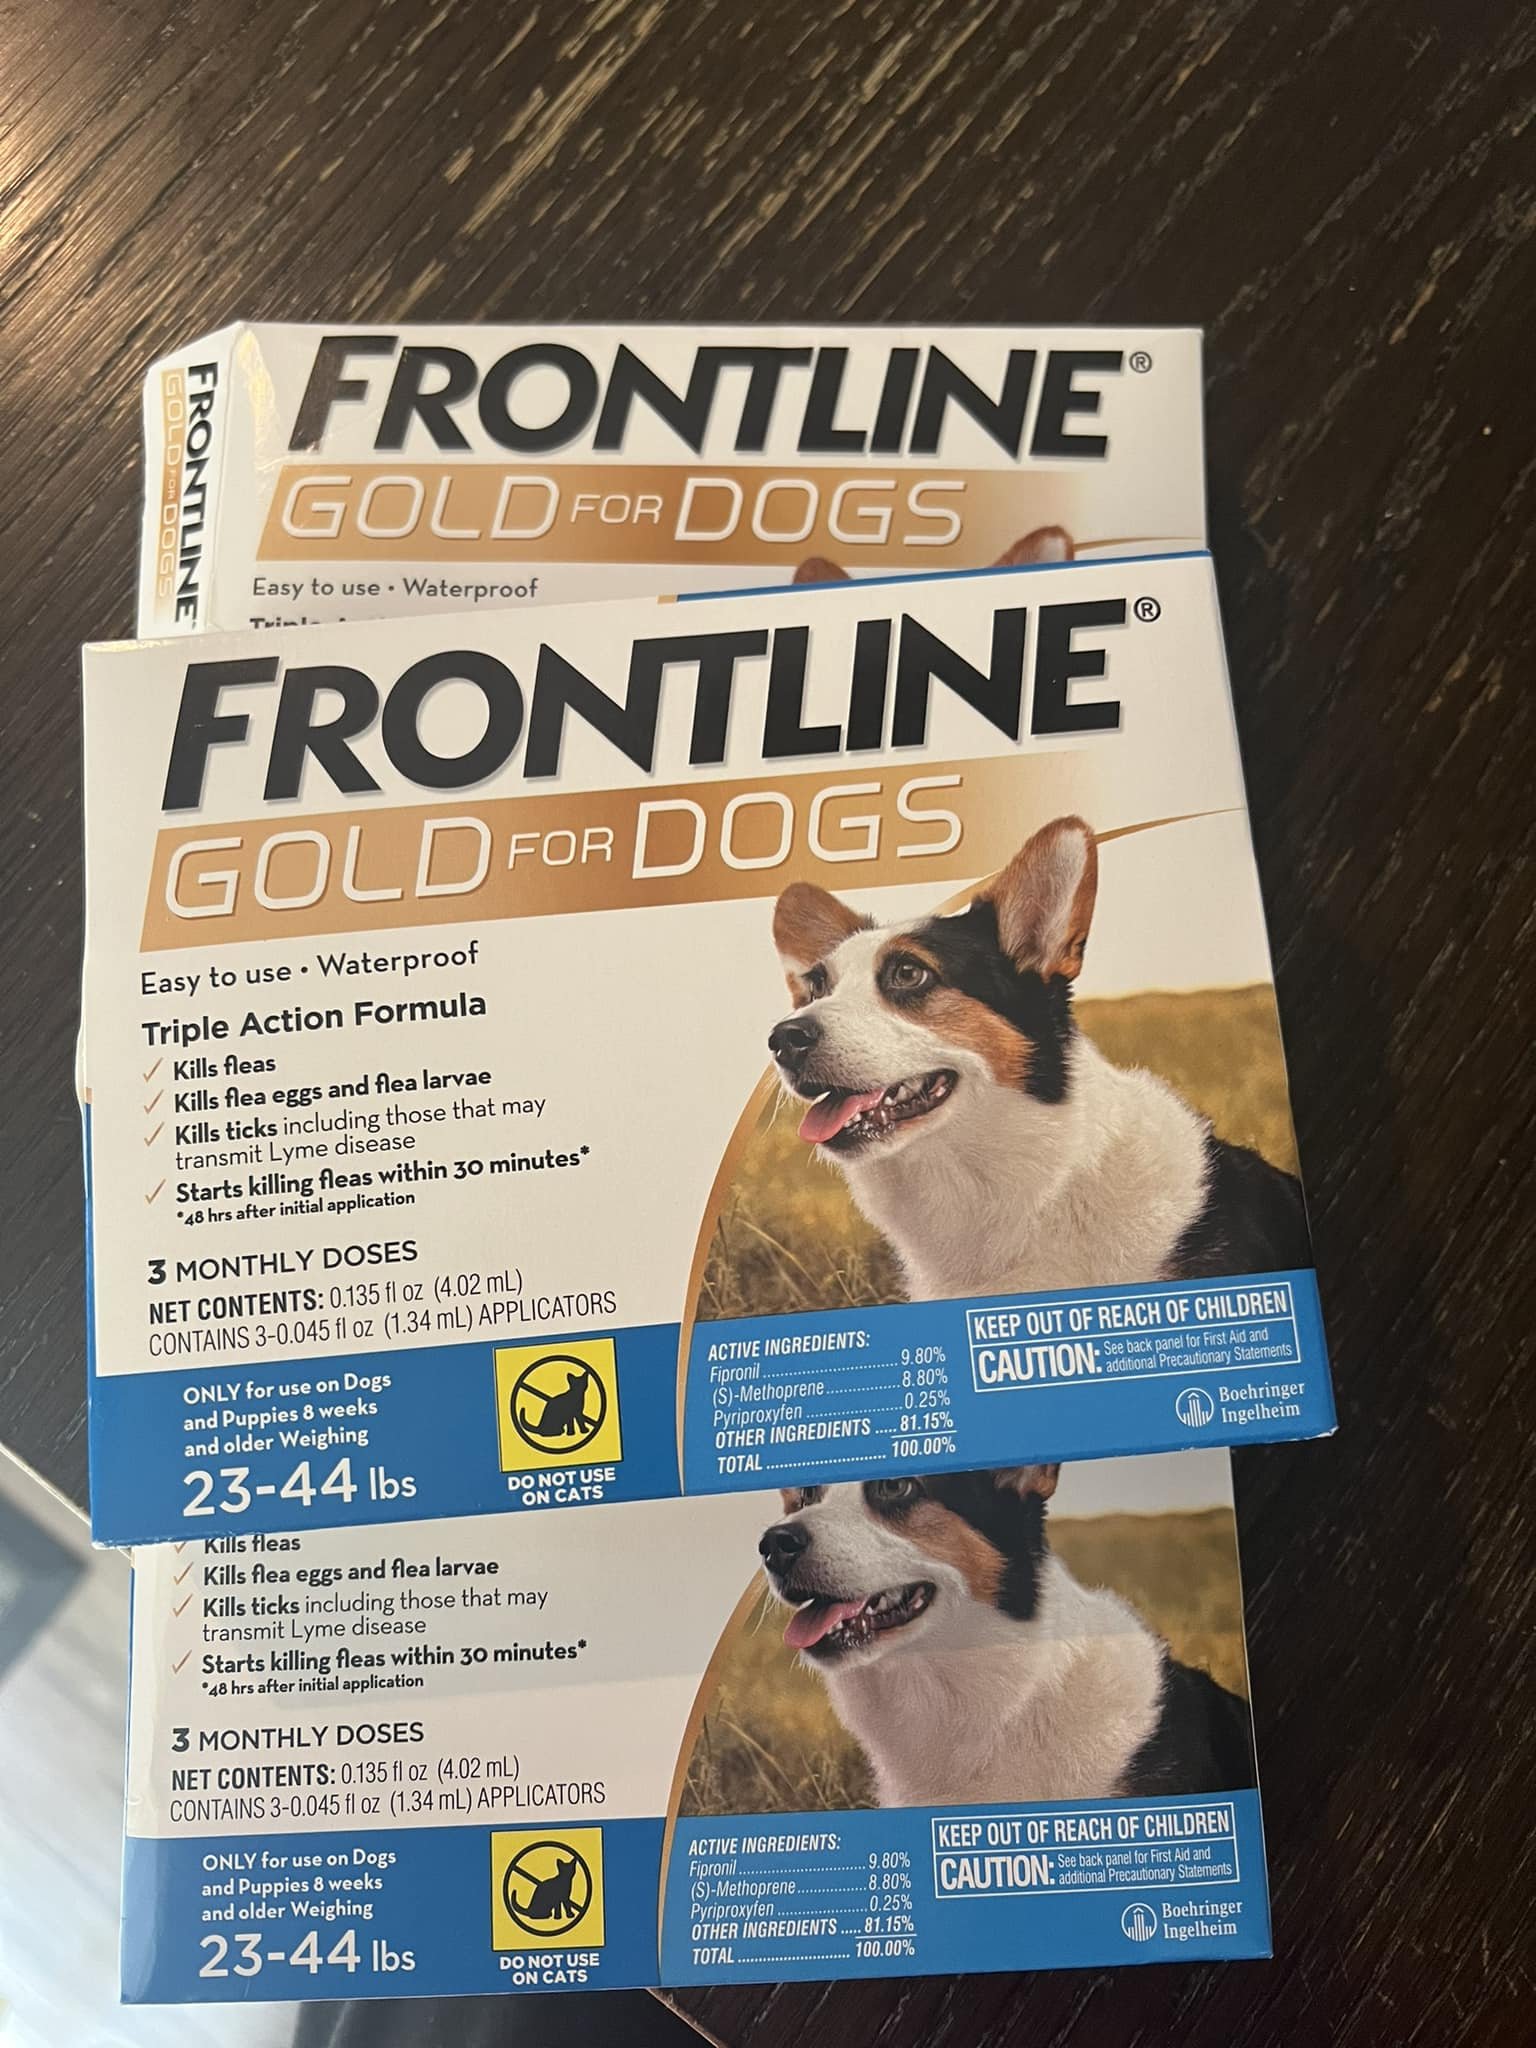 Selling 3 boxes of flea and tick preventative for dogs. $100 takes all 3 boxes. 9 month supply. $160
Value. Nothing wrong just don&rsquo;t need!